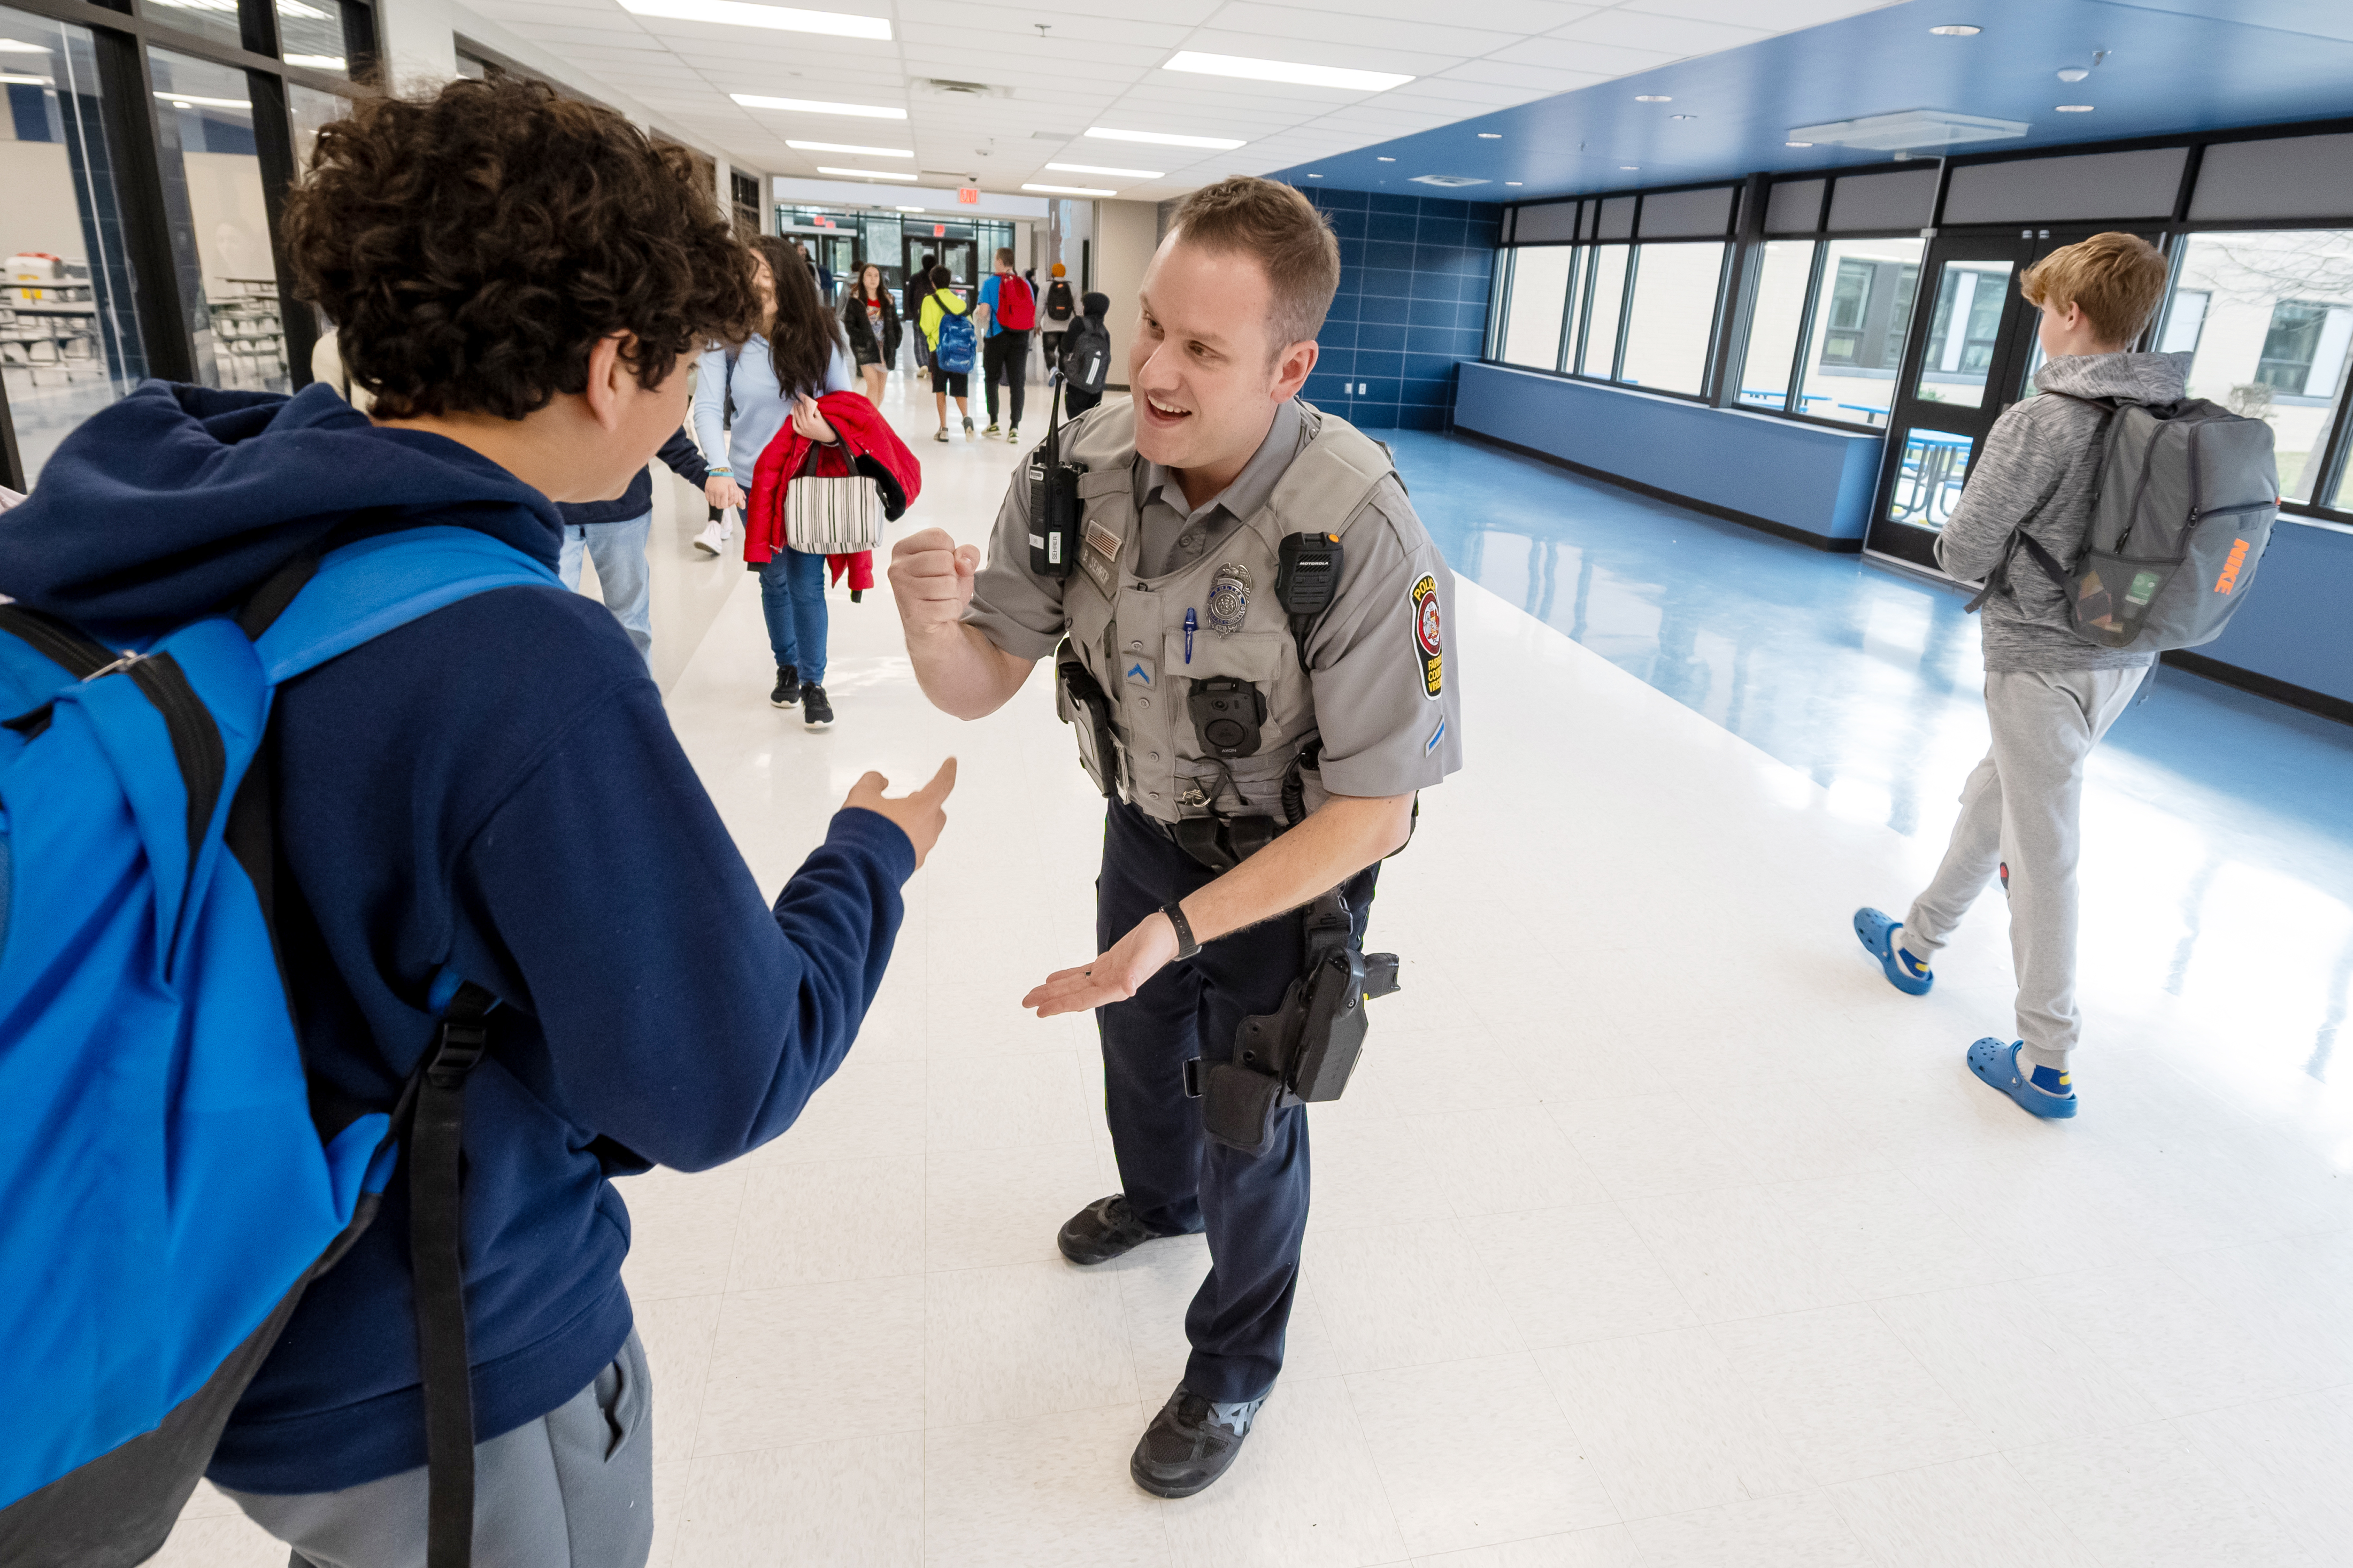 An officer plays rock paper scissors with a student